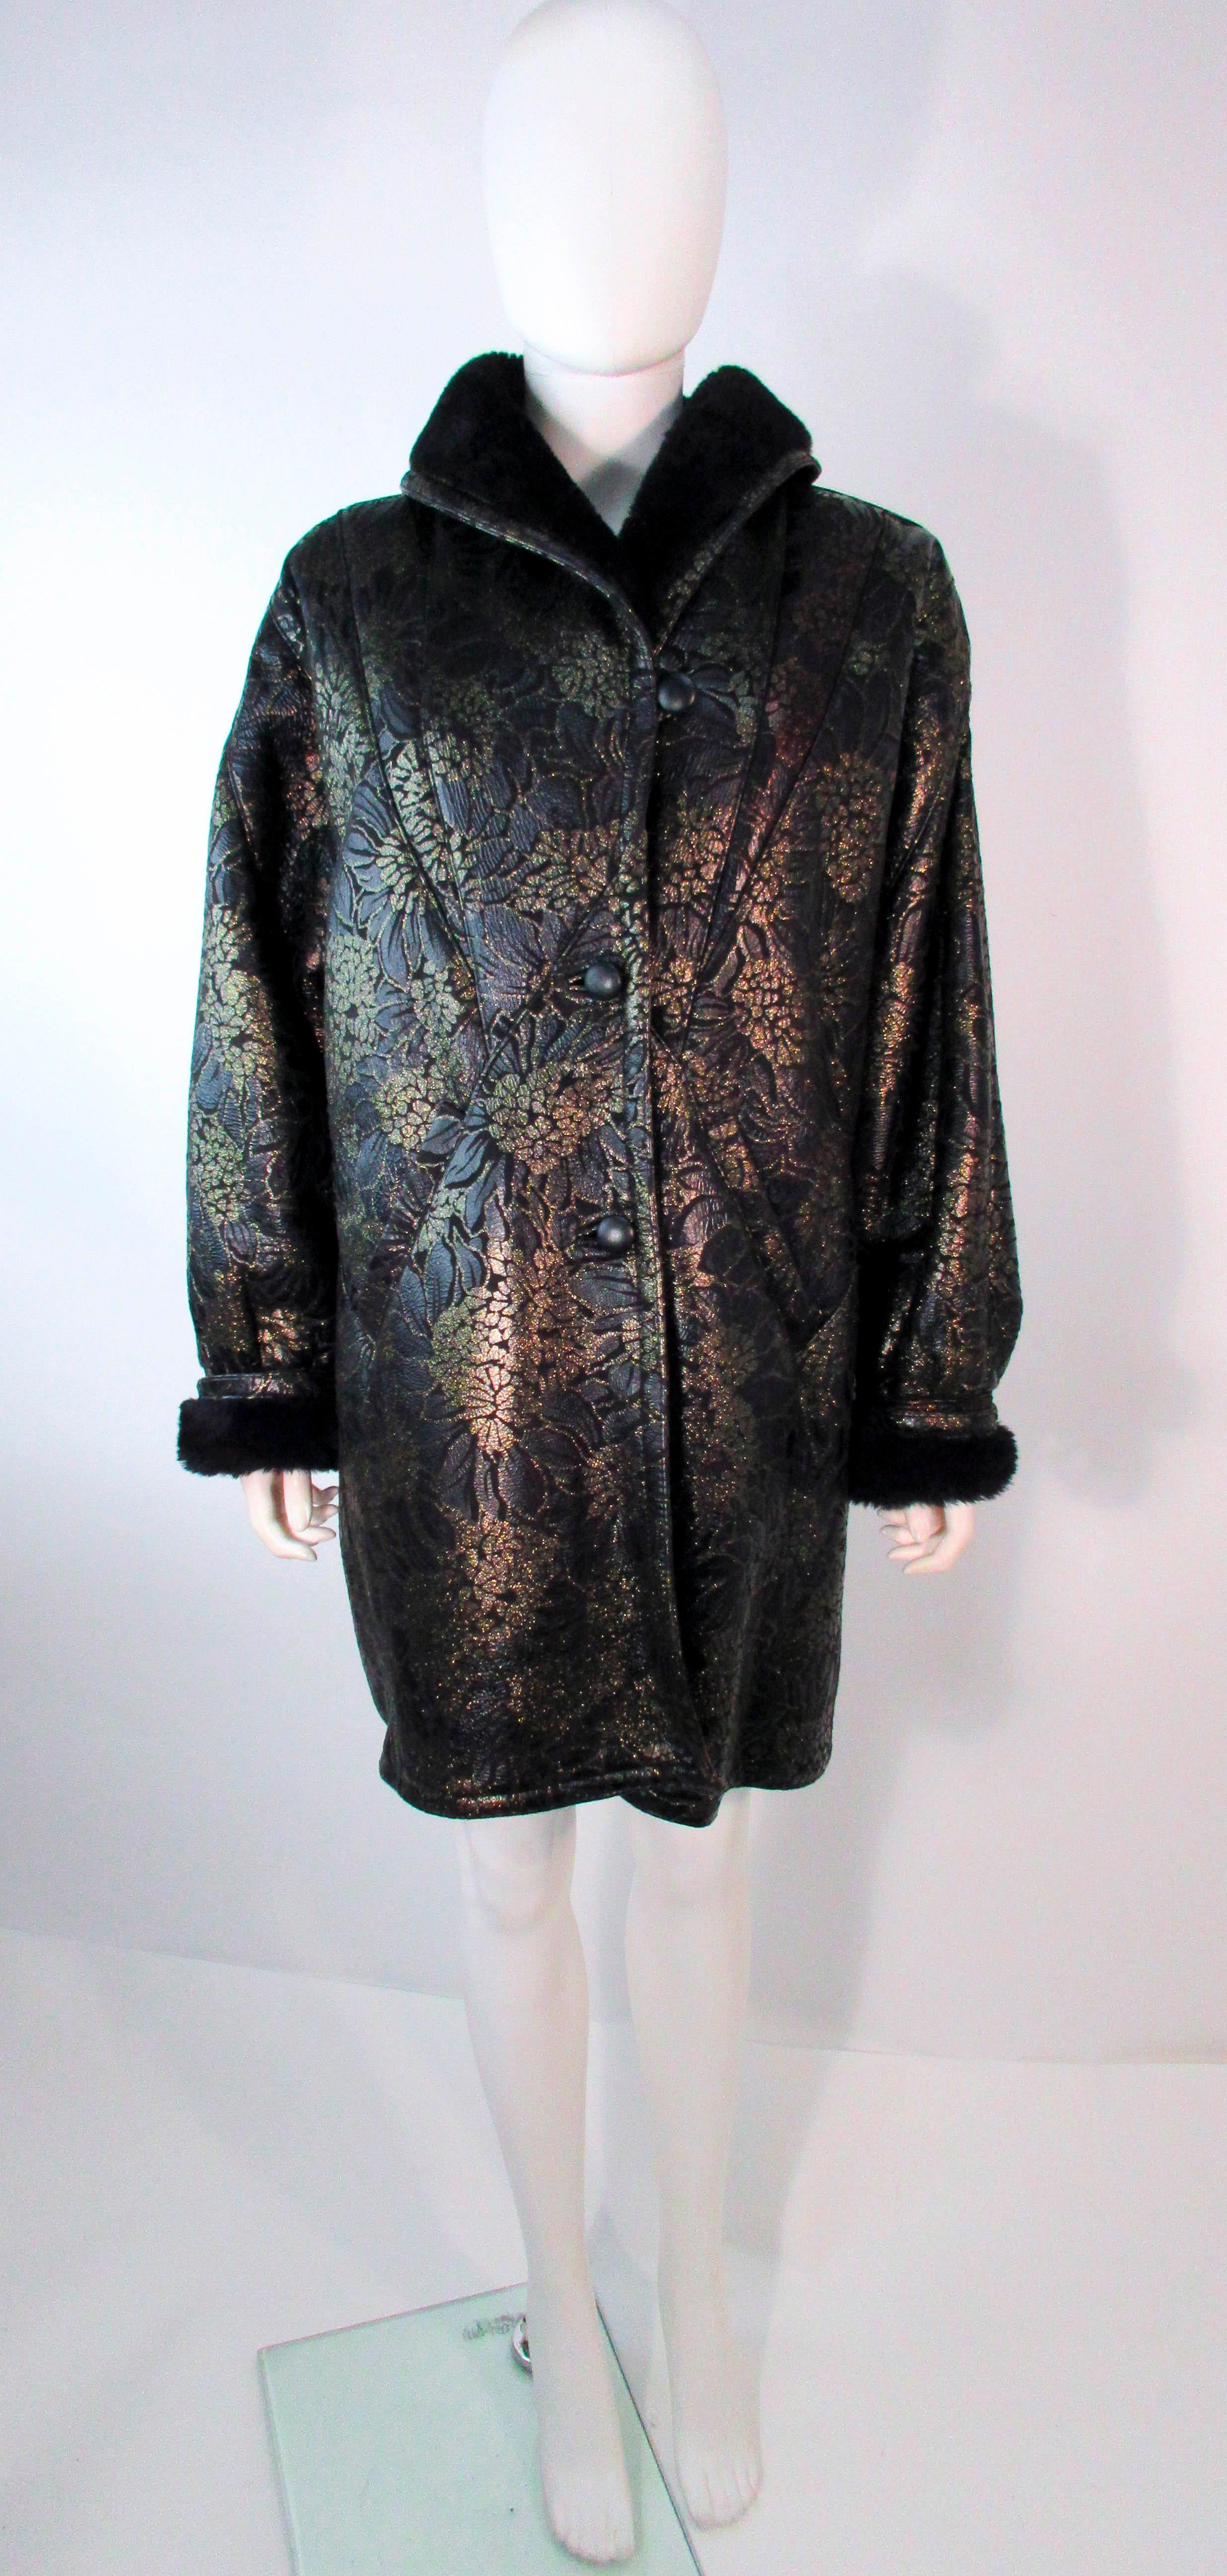 ADRIENNE LANDAU Spanish Shearling Leather Metallic Floral Pattern Coat Size 6 8 In Excellent Condition For Sale In Los Angeles, CA